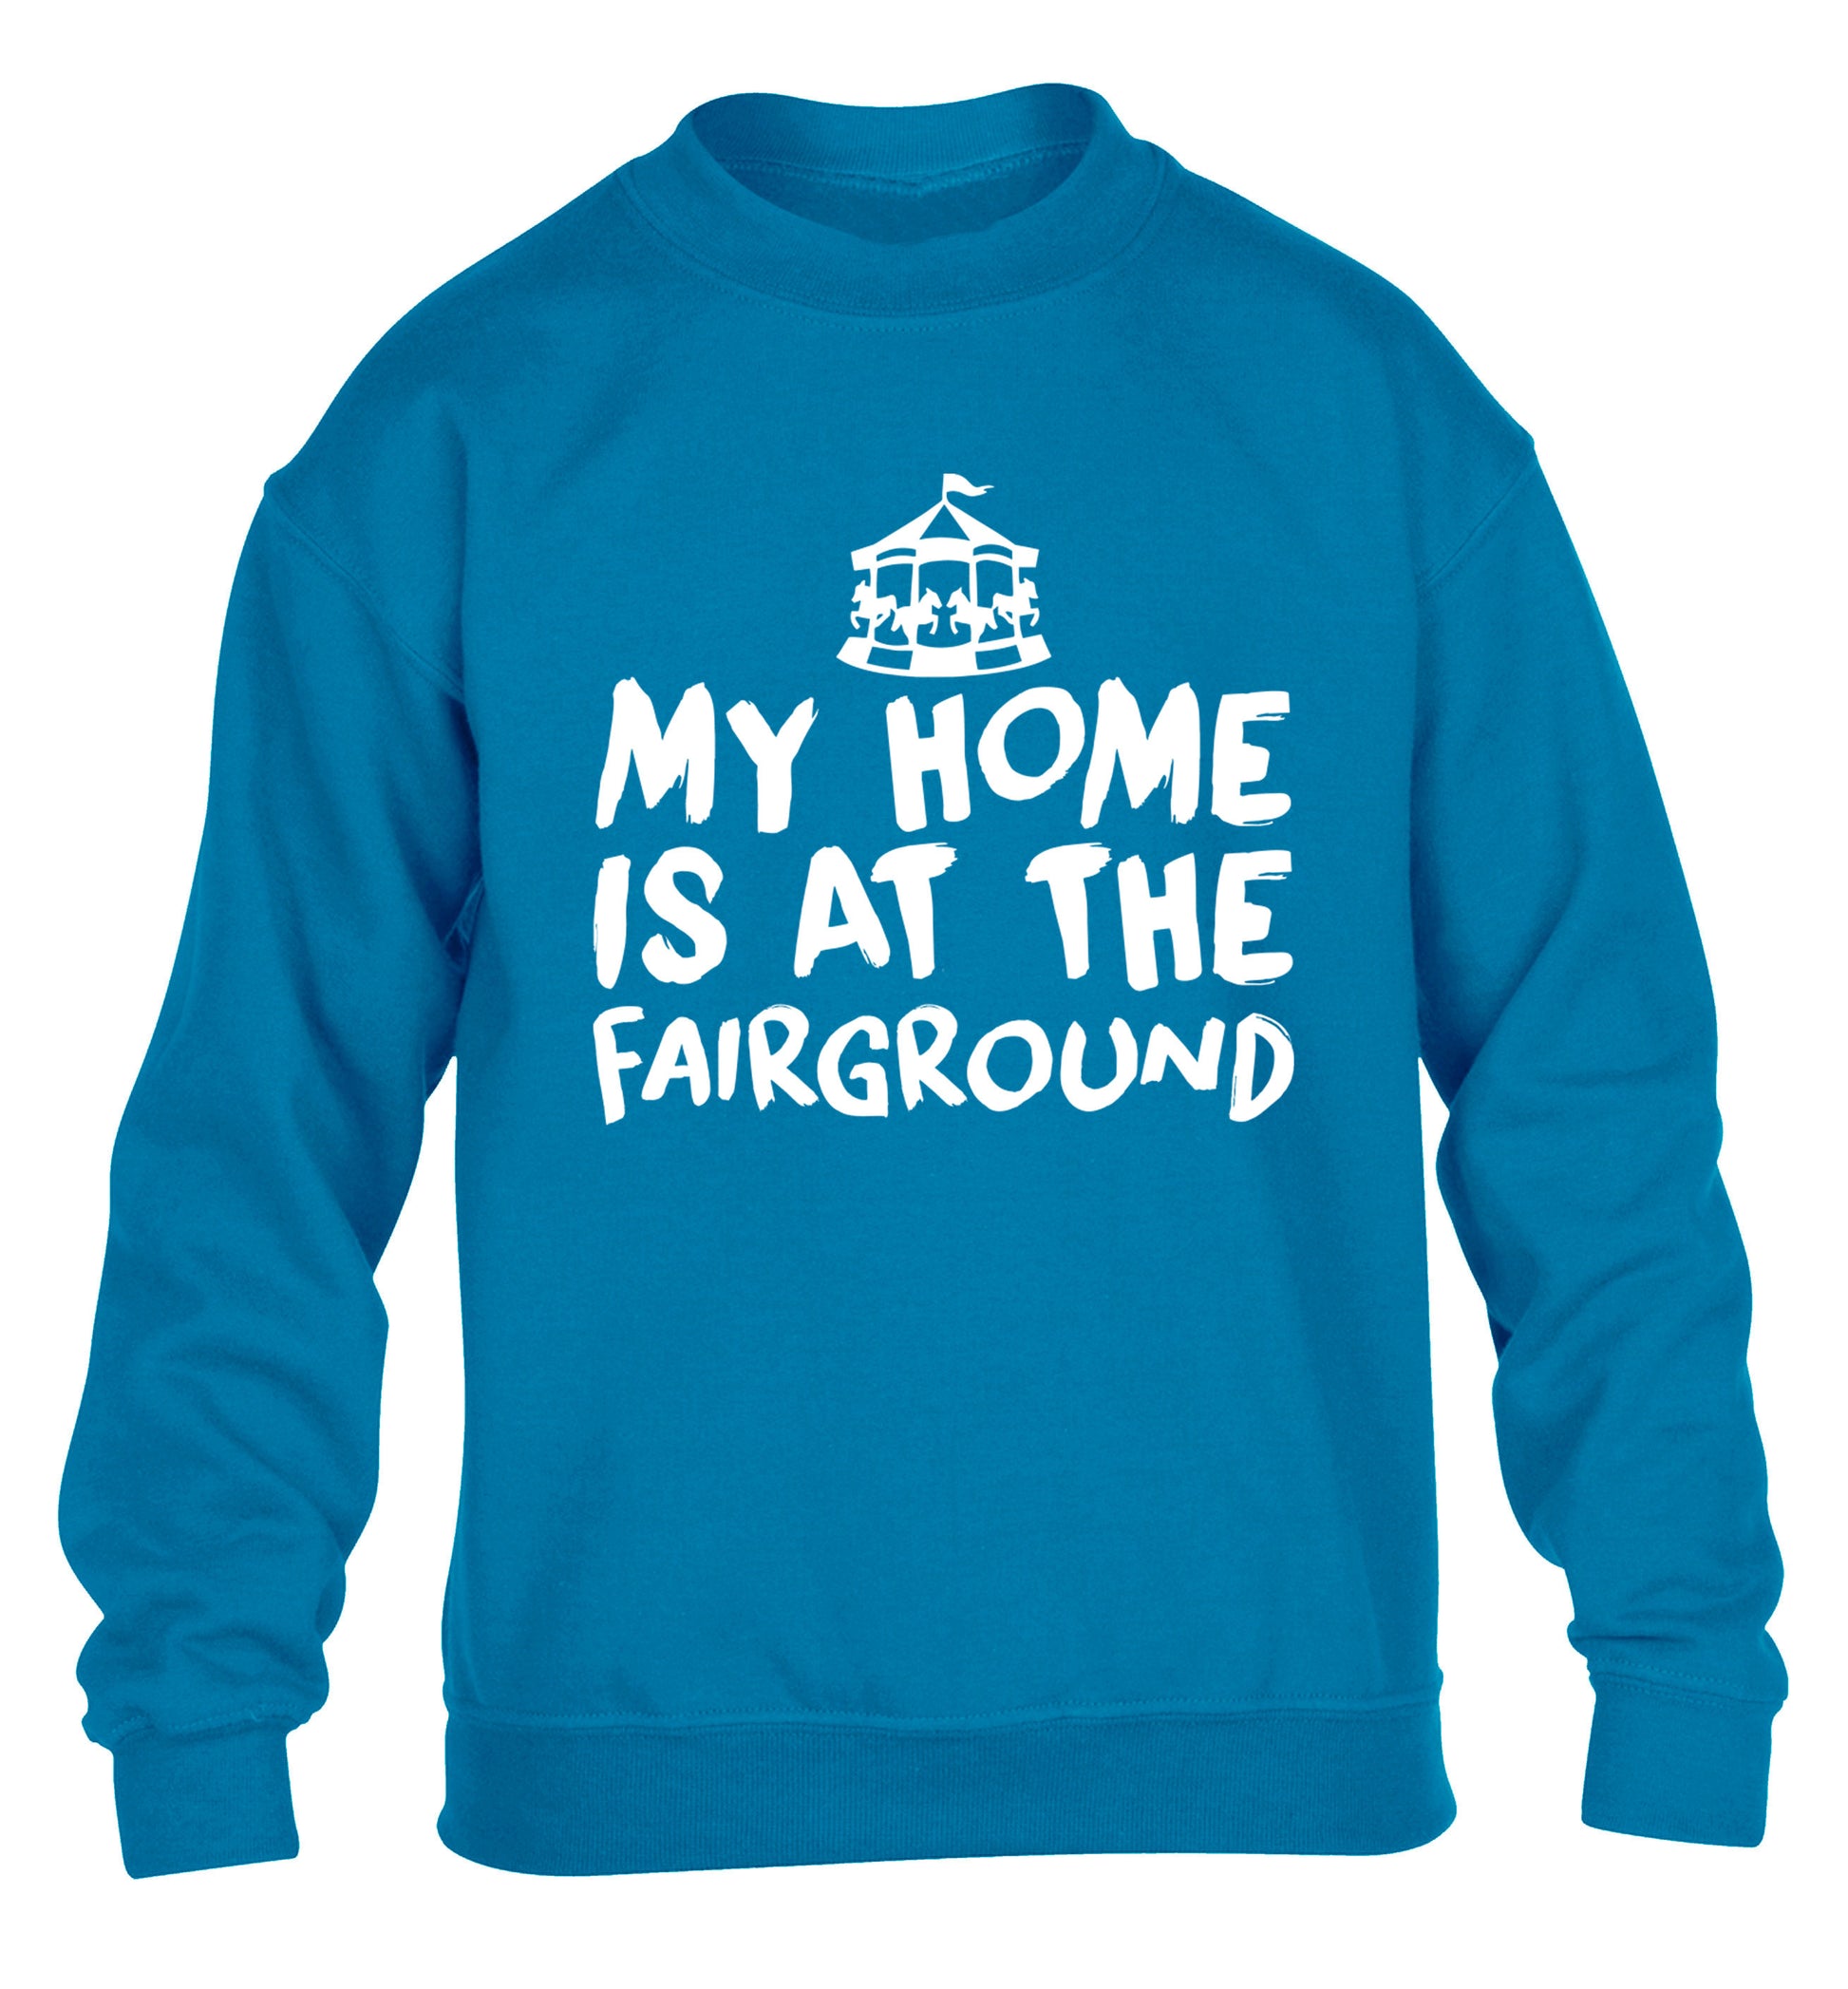 My home is at the fairground children's blue sweater 12-14 Years